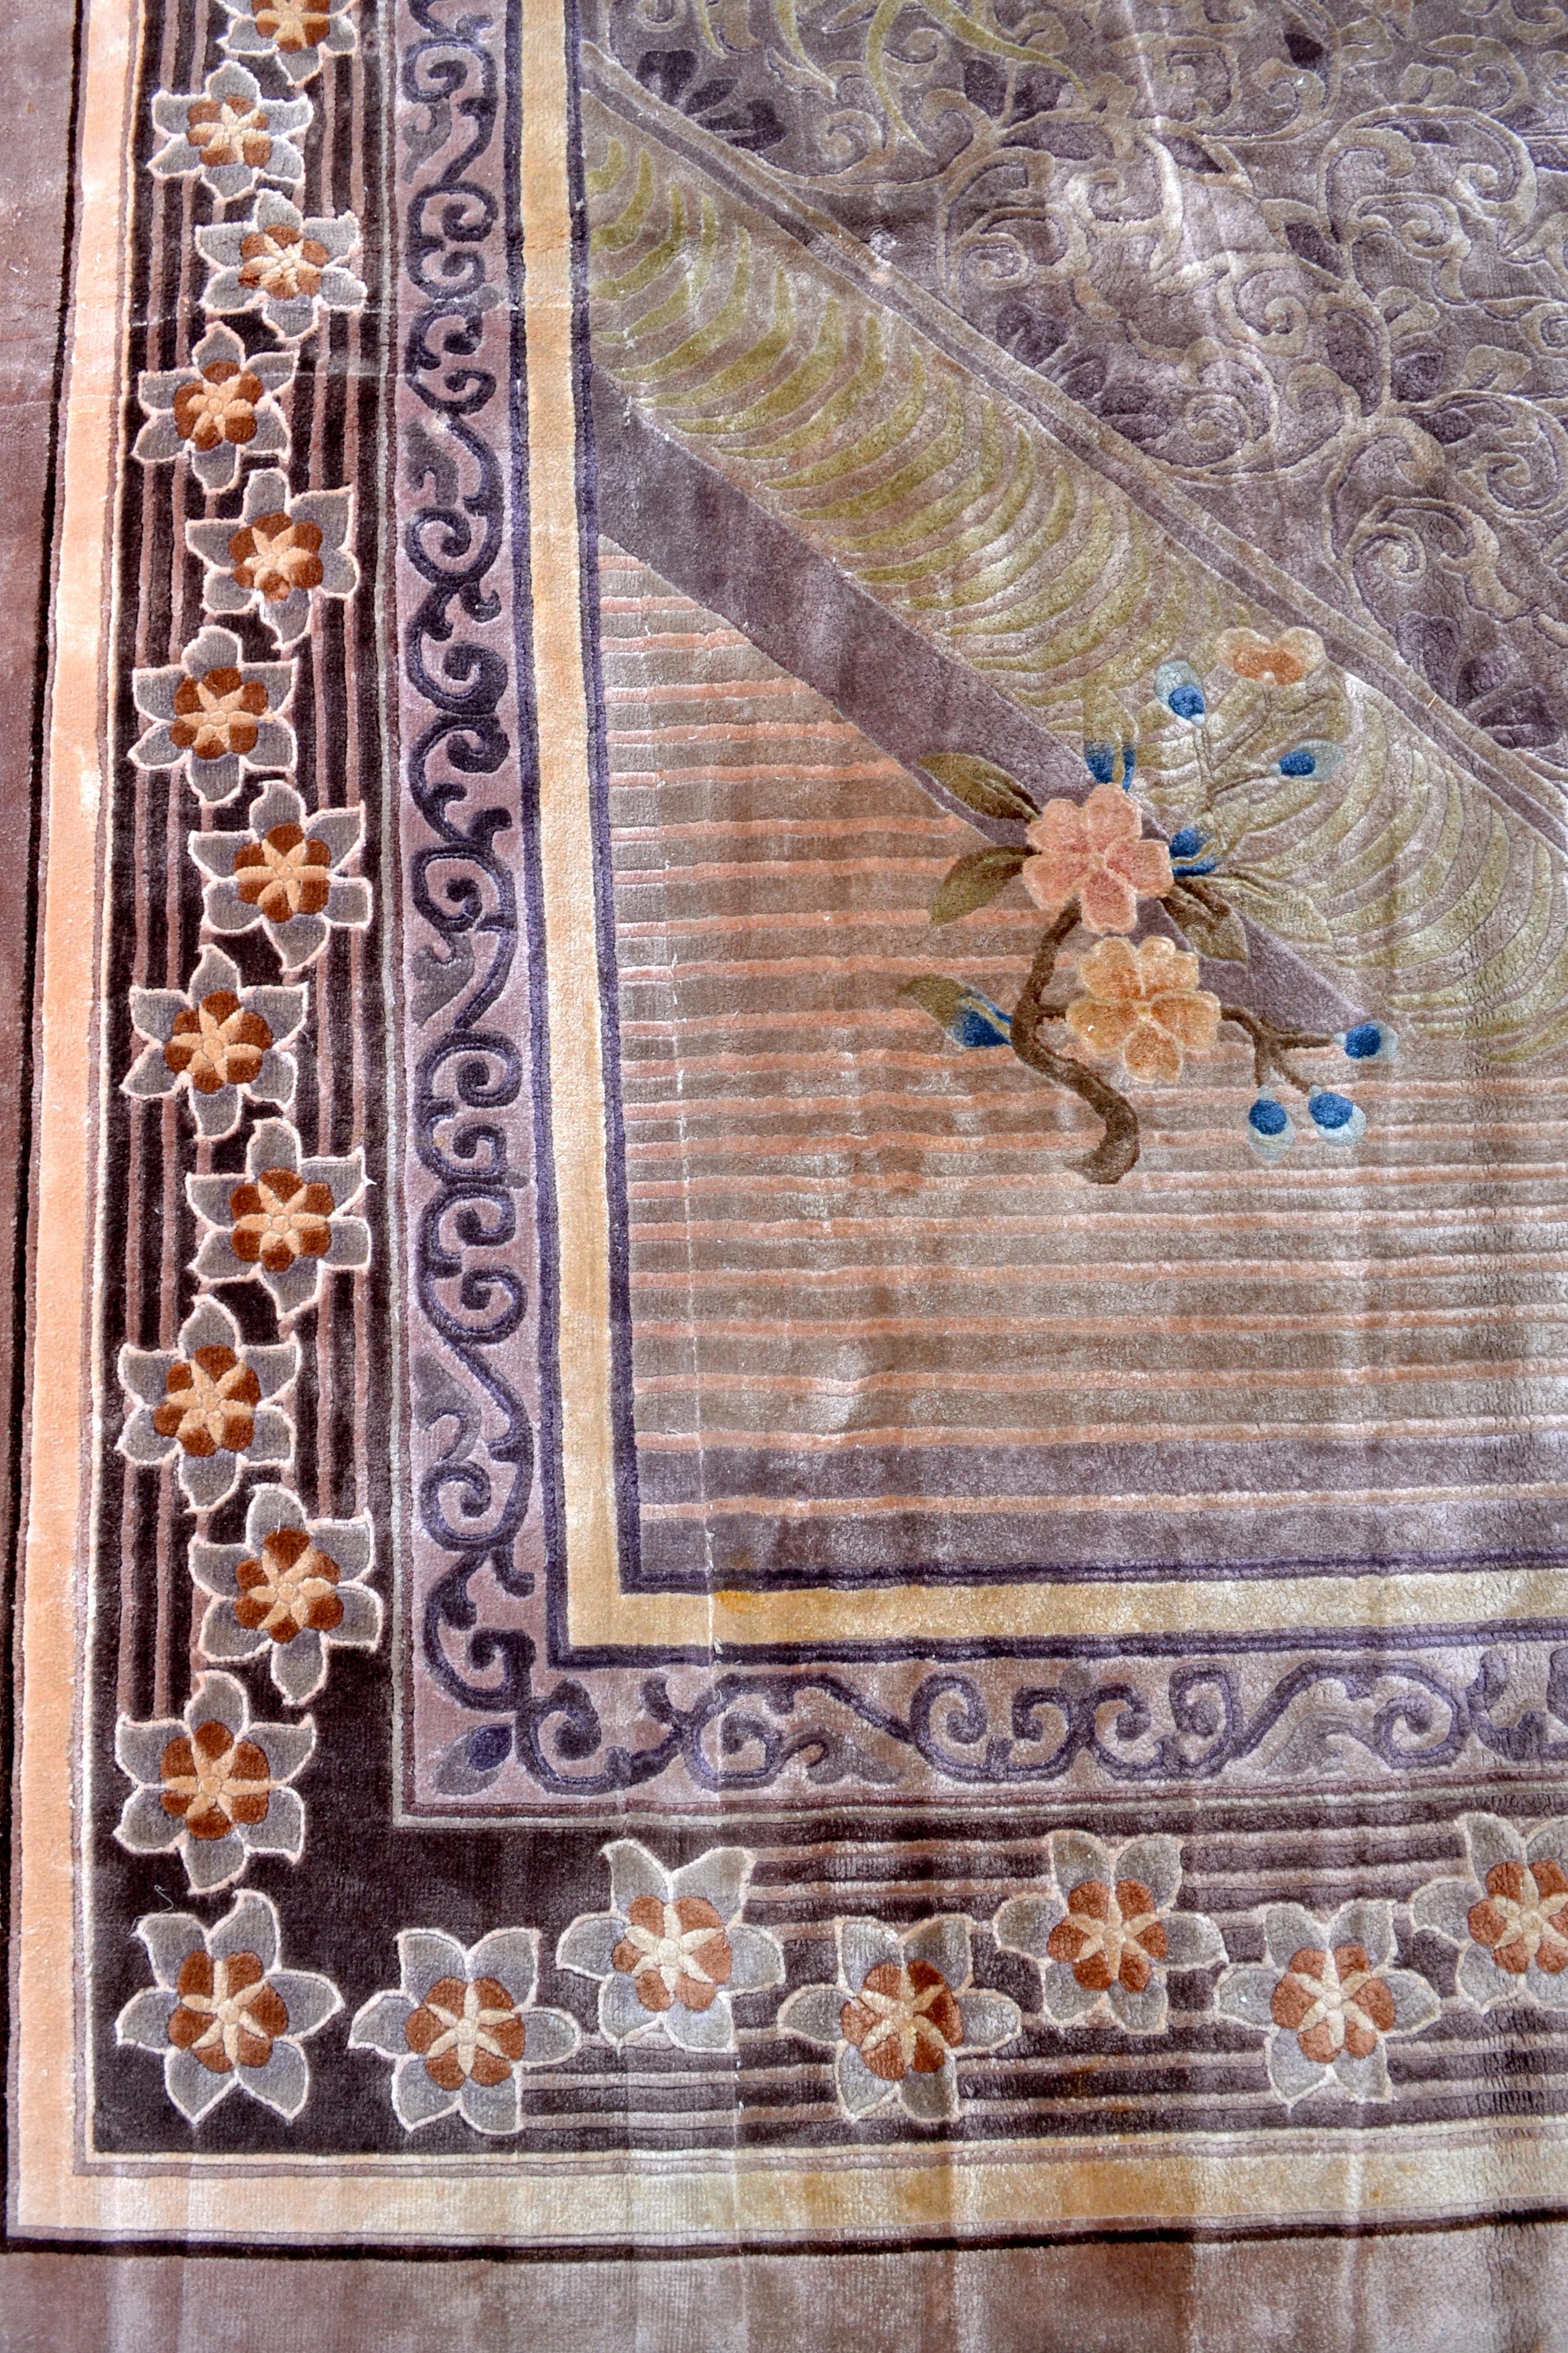 A luxurious modern Chinese handwoven silk carpet with overall flowers and clouds; the cloudy blue/grey background shimmers depending on the viewing angle; Model Titled 